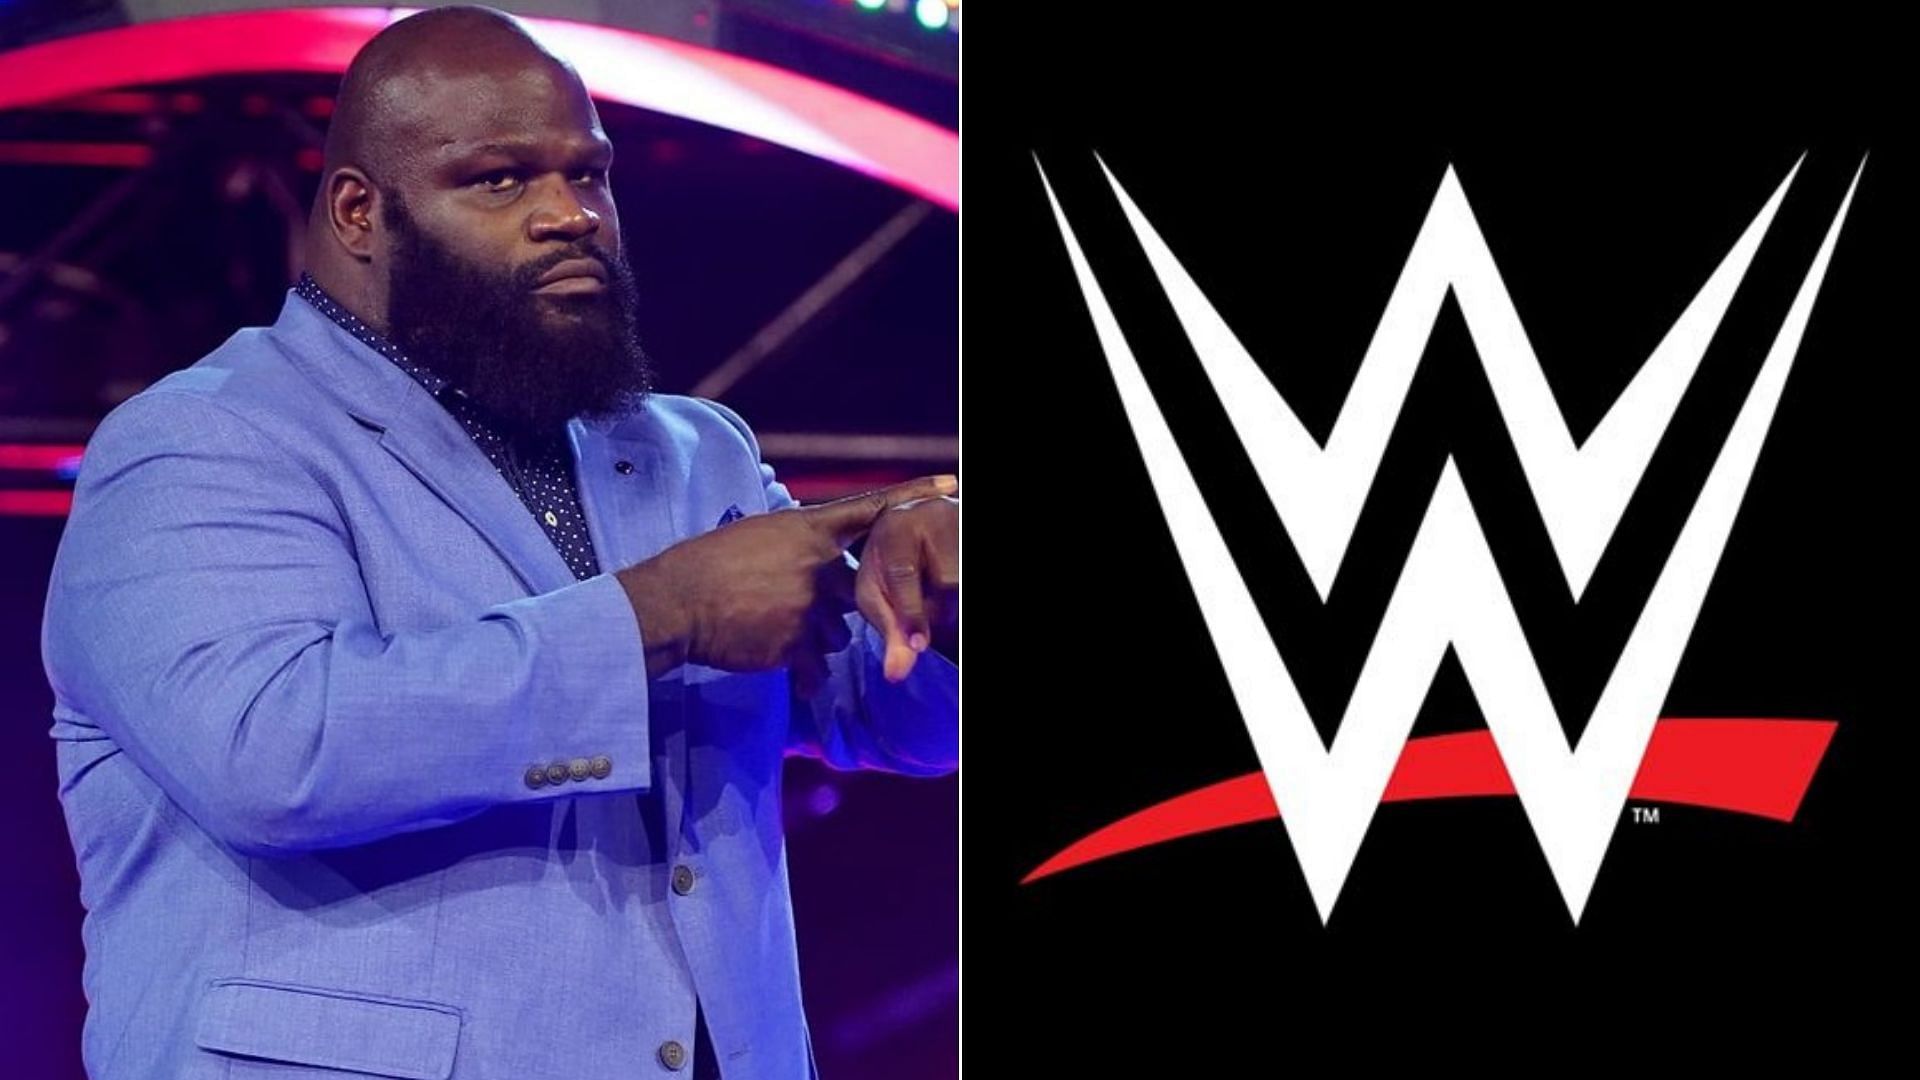 Mark Henry has a close friendship with this legend